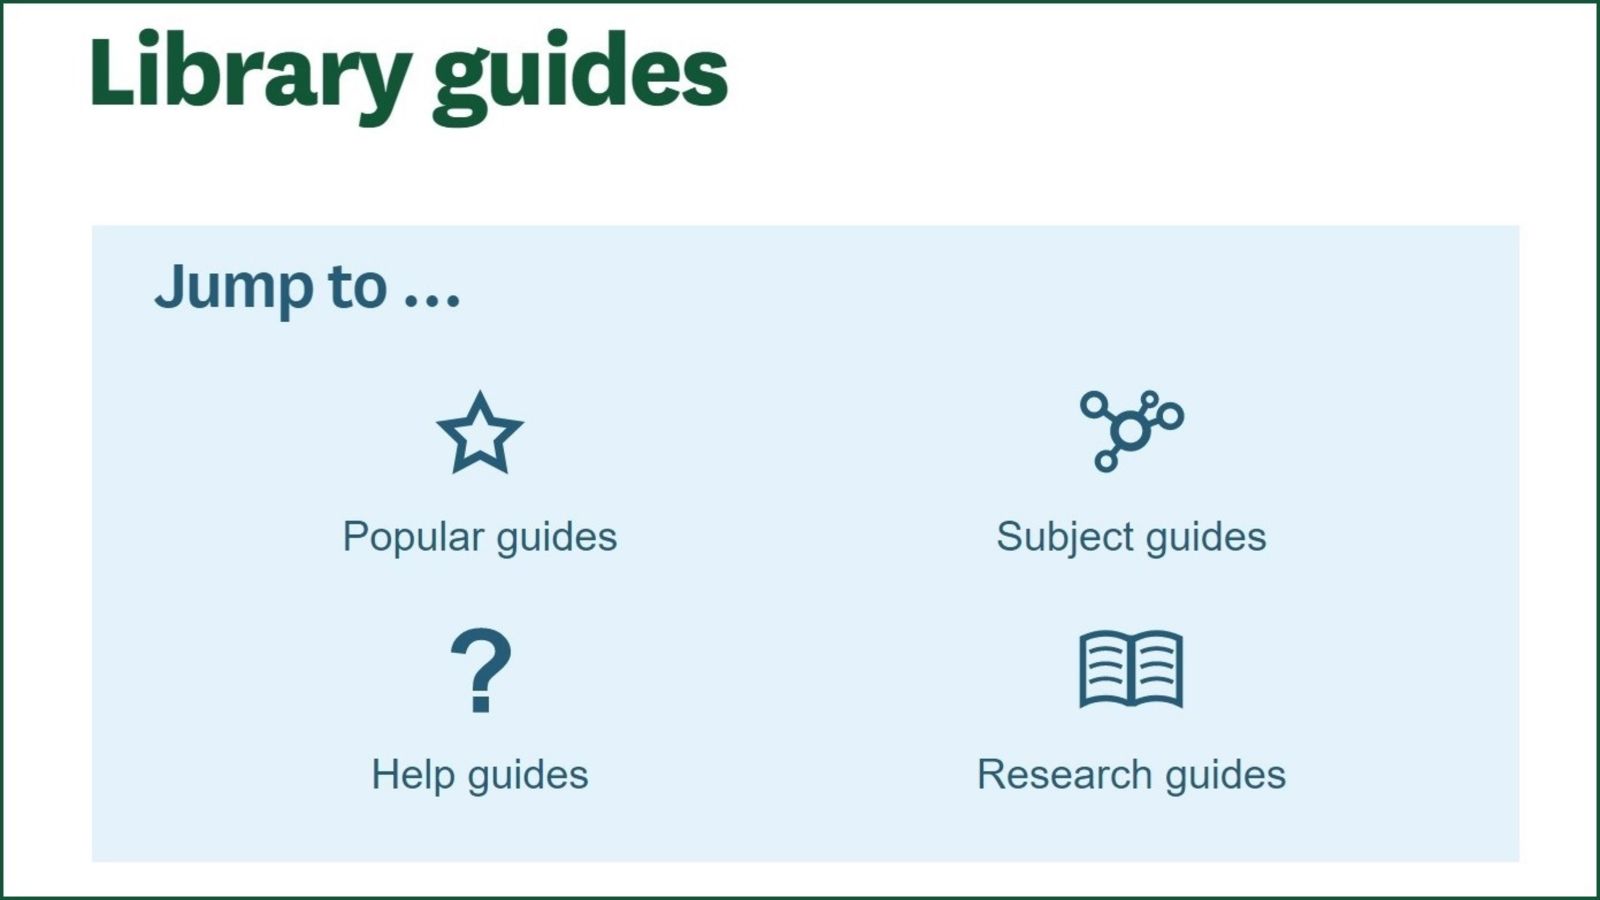 Screenshot showing the four types of library guides: Popular, Subject, Help, and Research.